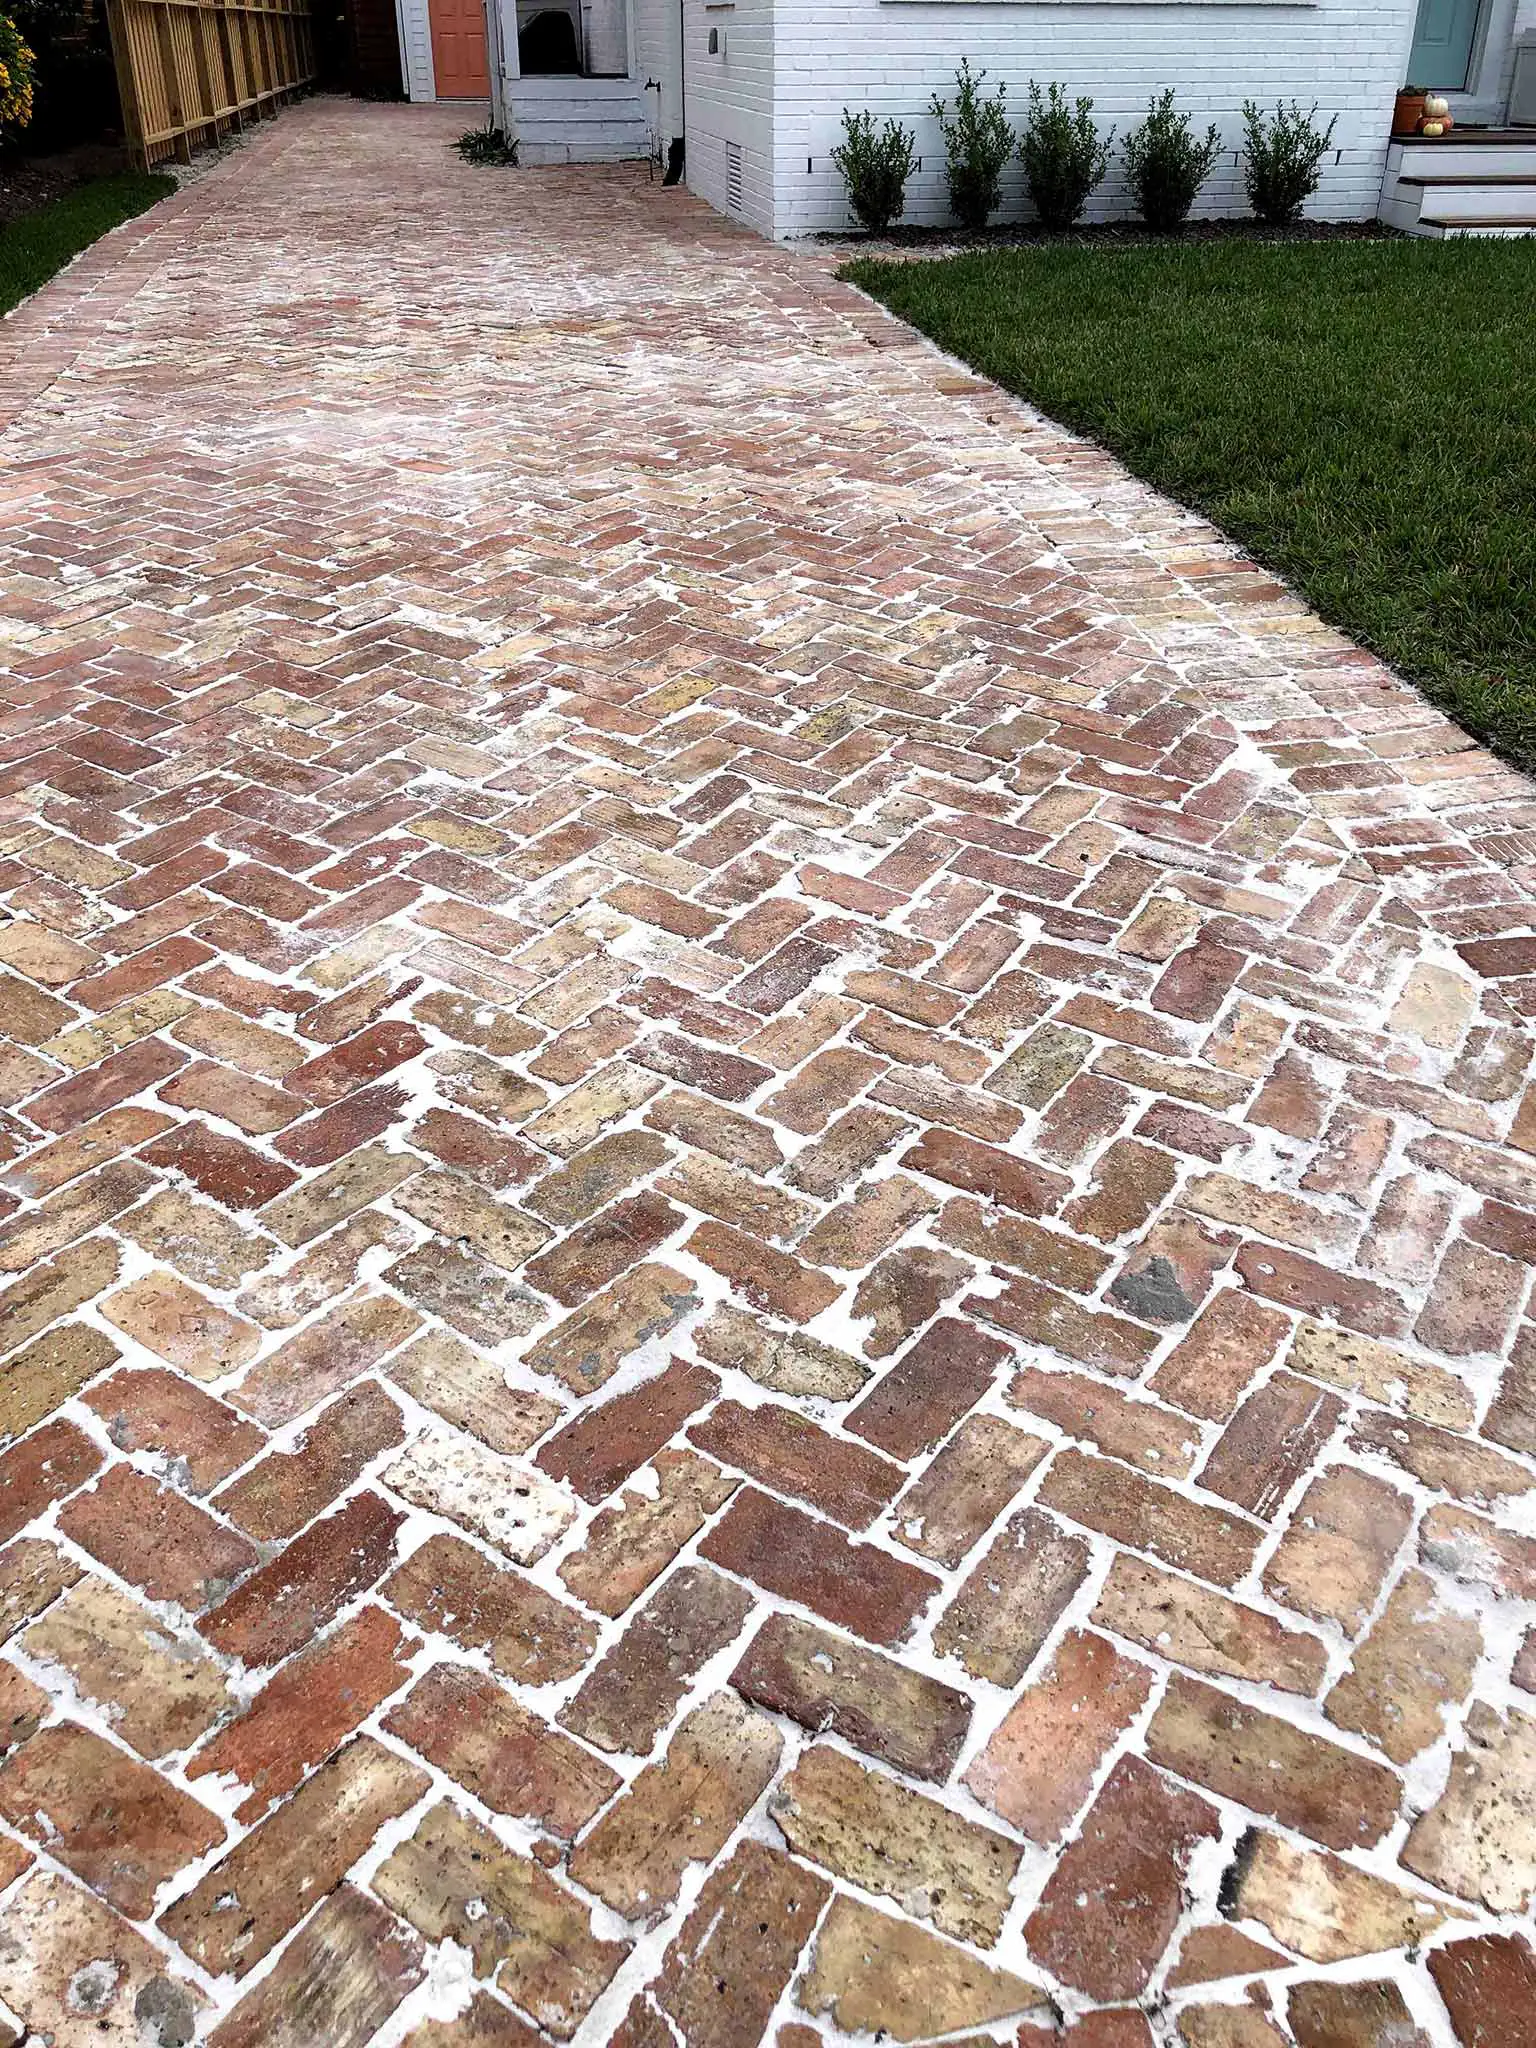 How To Clean Brick Pavery Love, How To Clean Patio Paver Joints